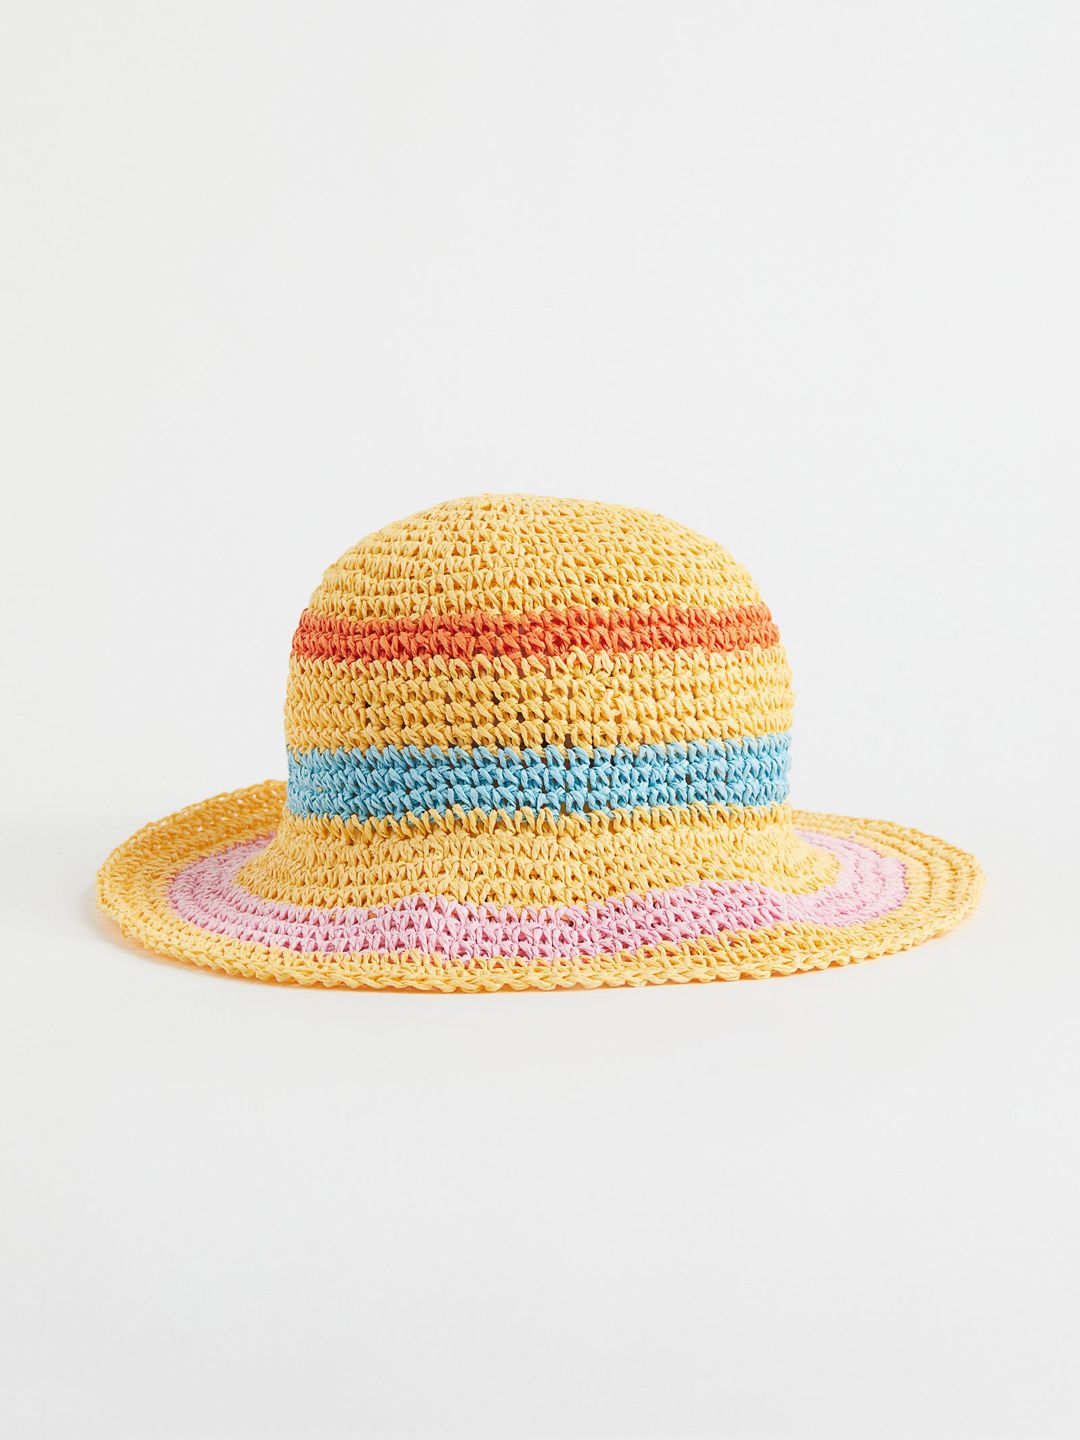 H&M Women Yellow & Multicoloured Straw Hat Price in India